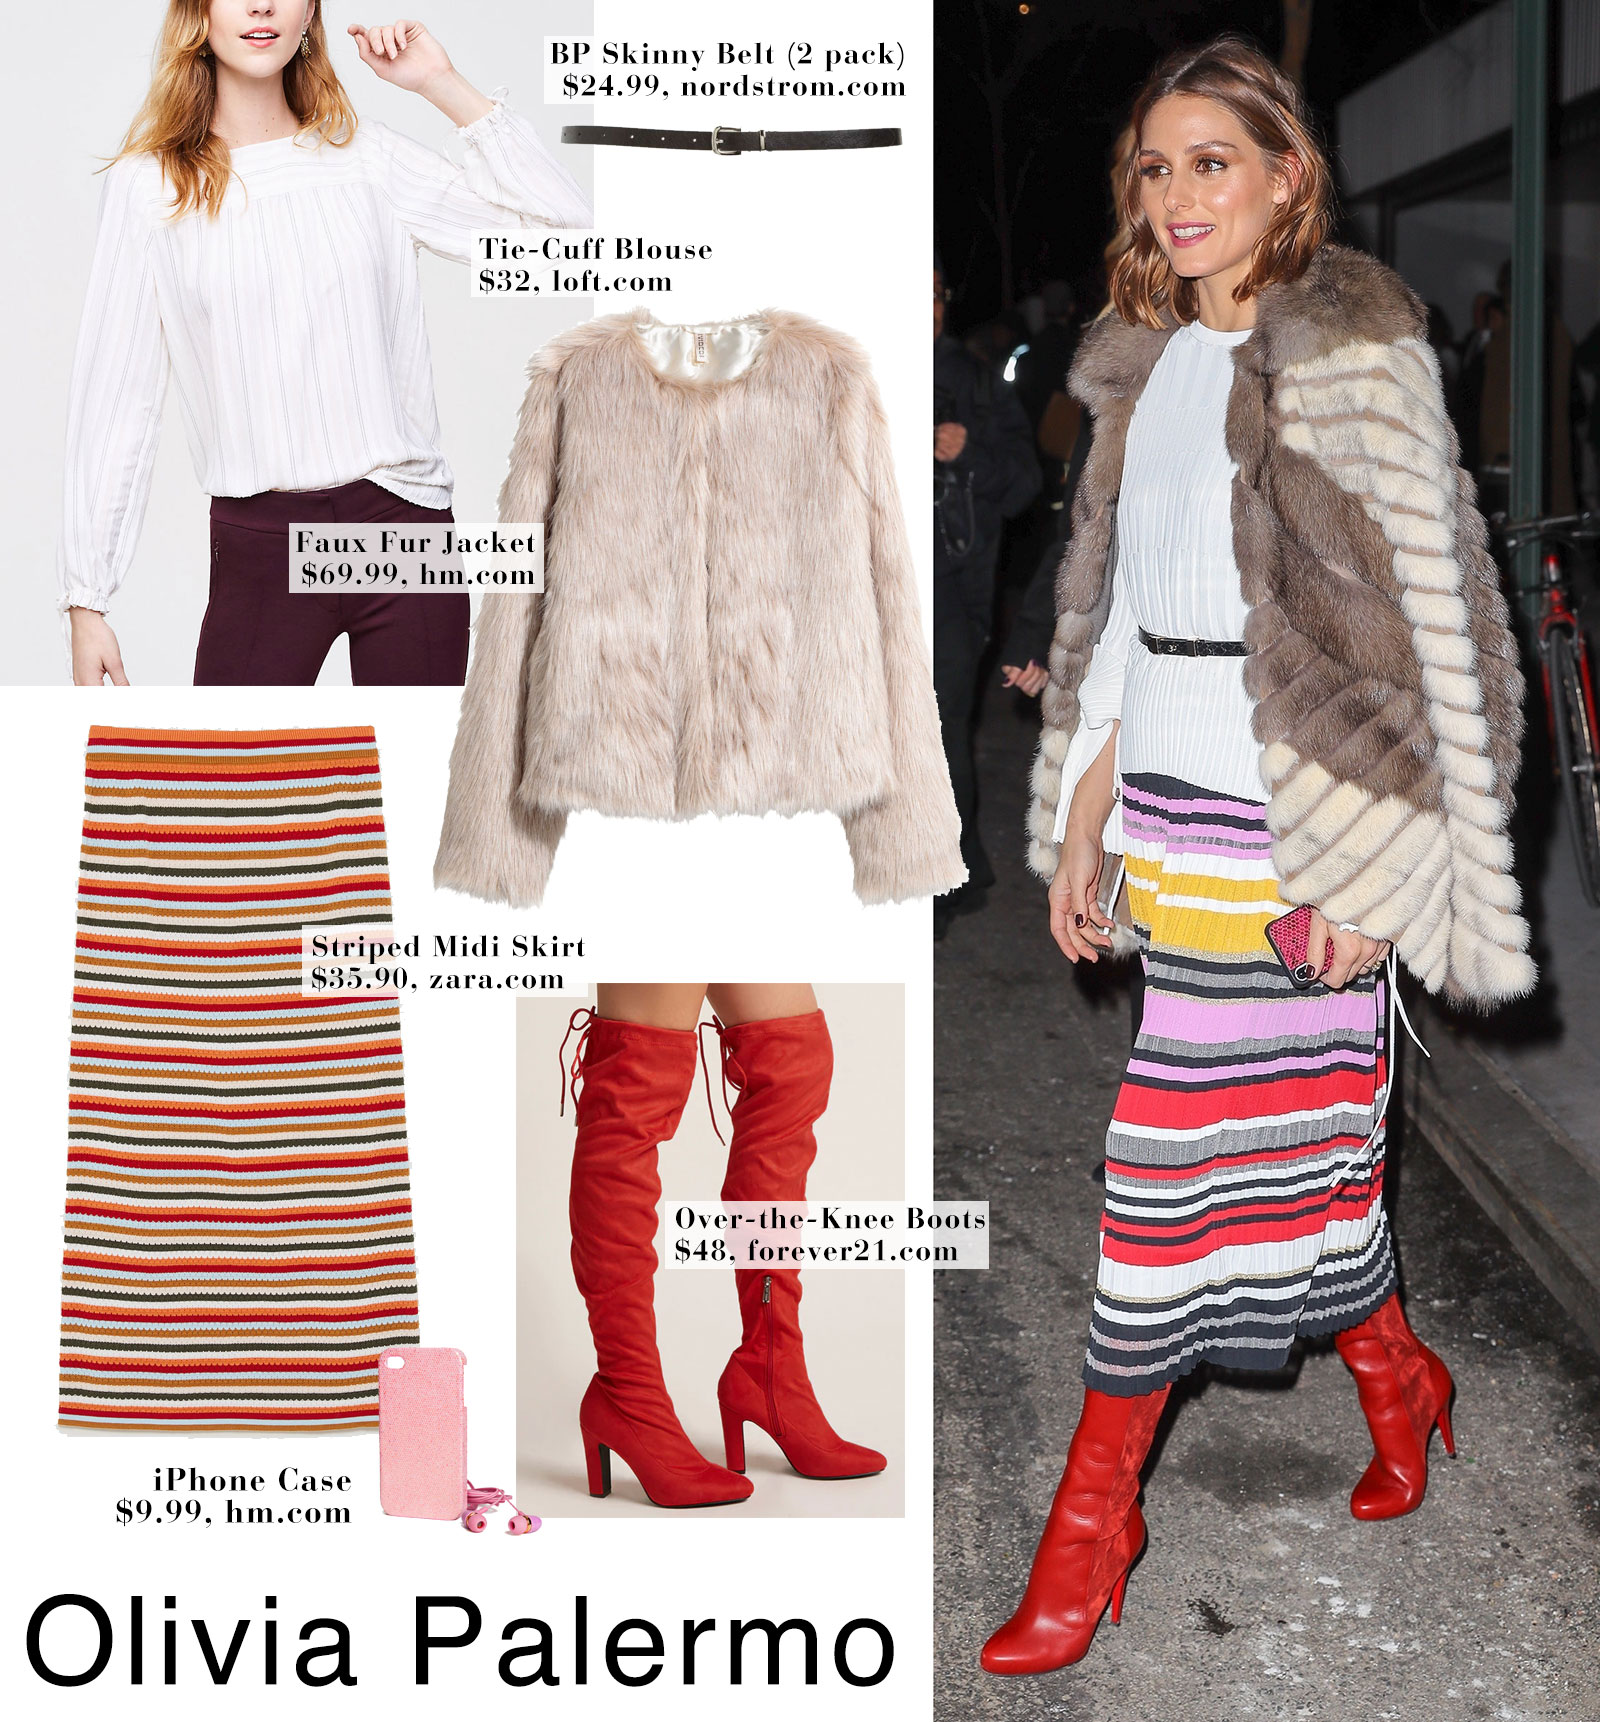 Olivia Palermo attends the Carolina Herrera show at NYFW in a striped midi skirt, tall red boots and fur cape.